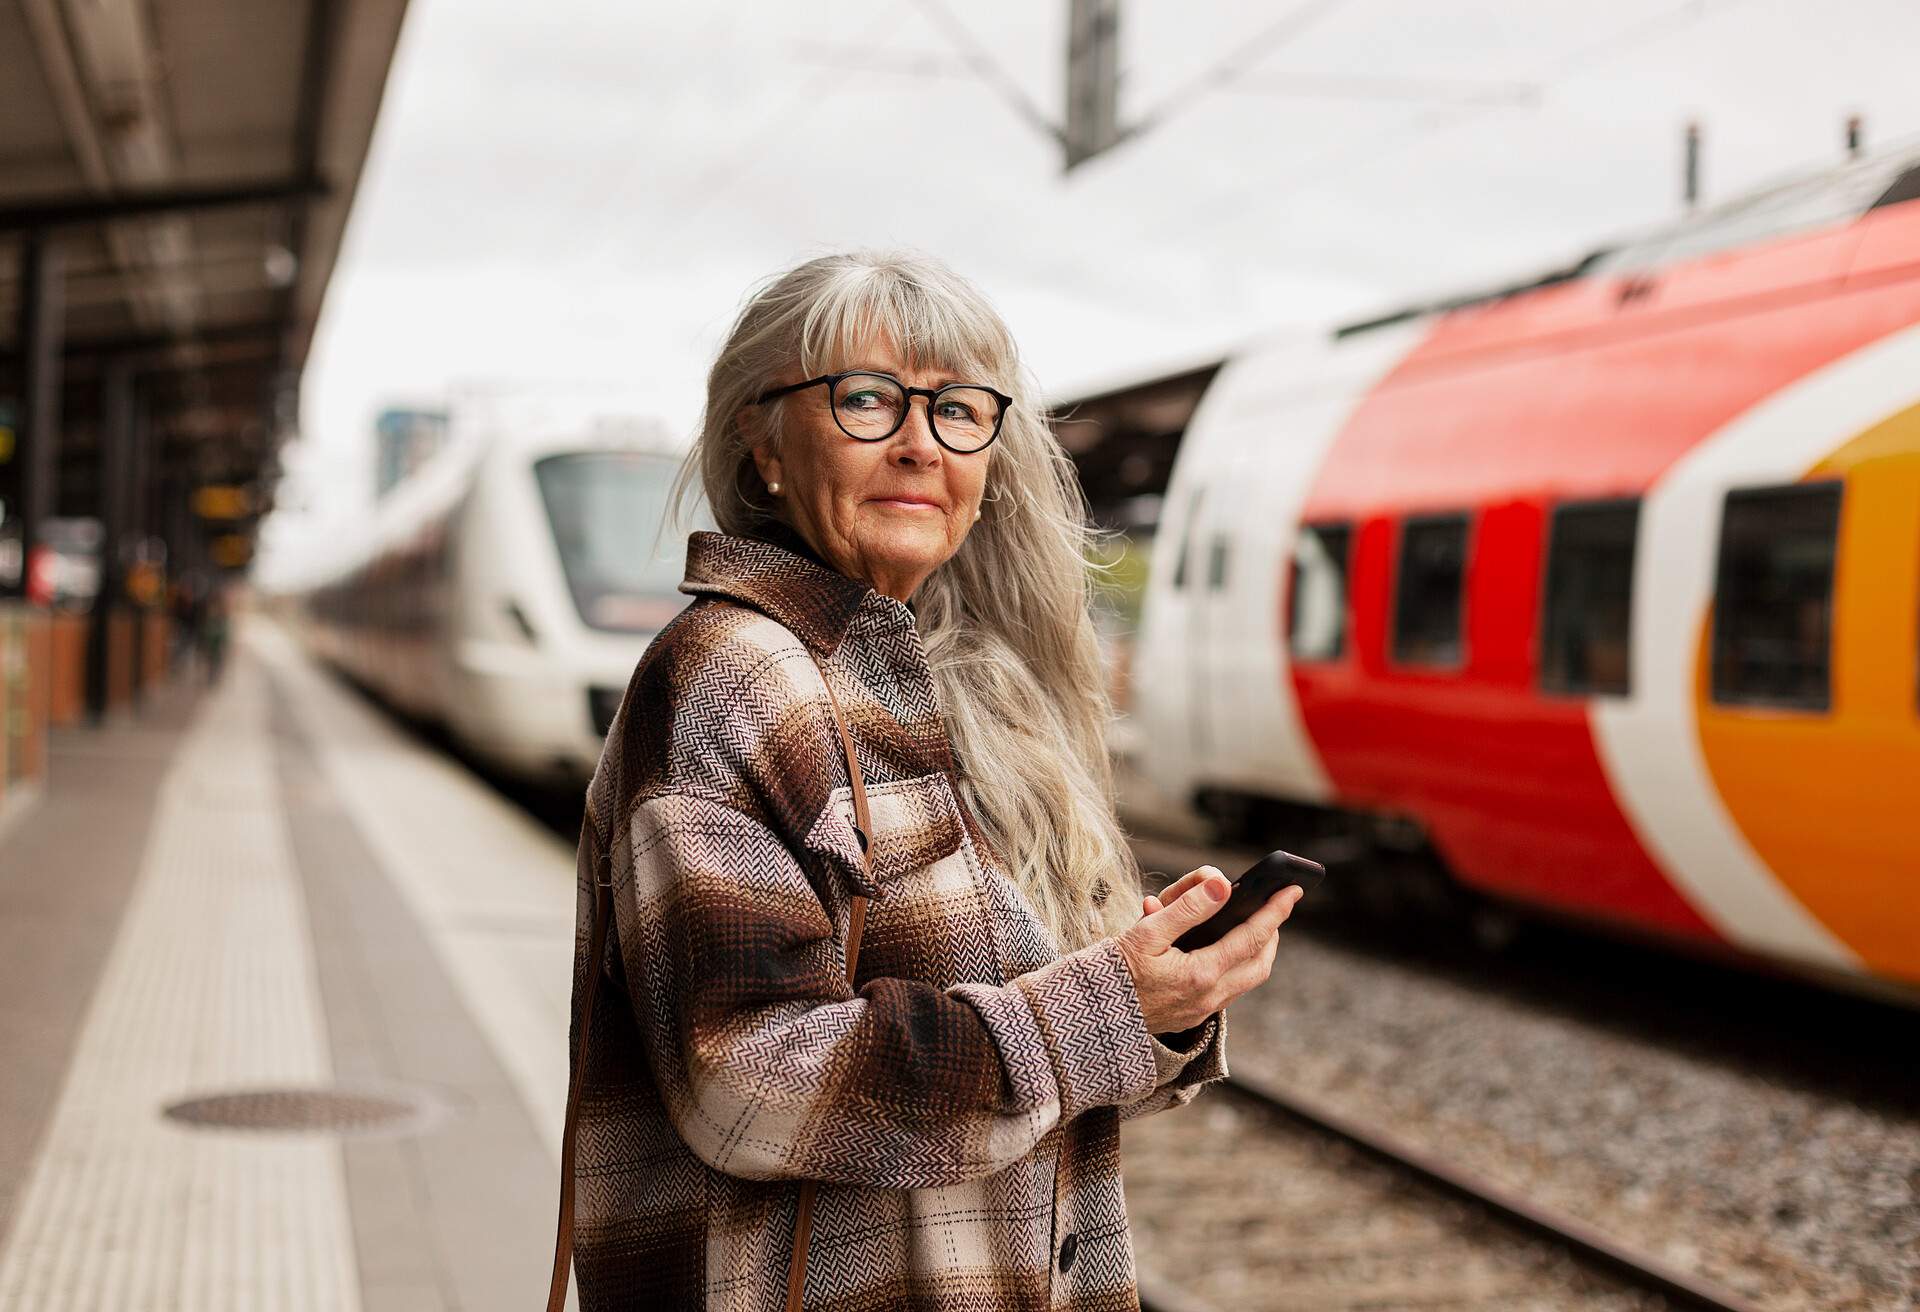 THEME_TRAIN_TRAVEL_PEOPLE_WOMAN_GettyImages-1311614643